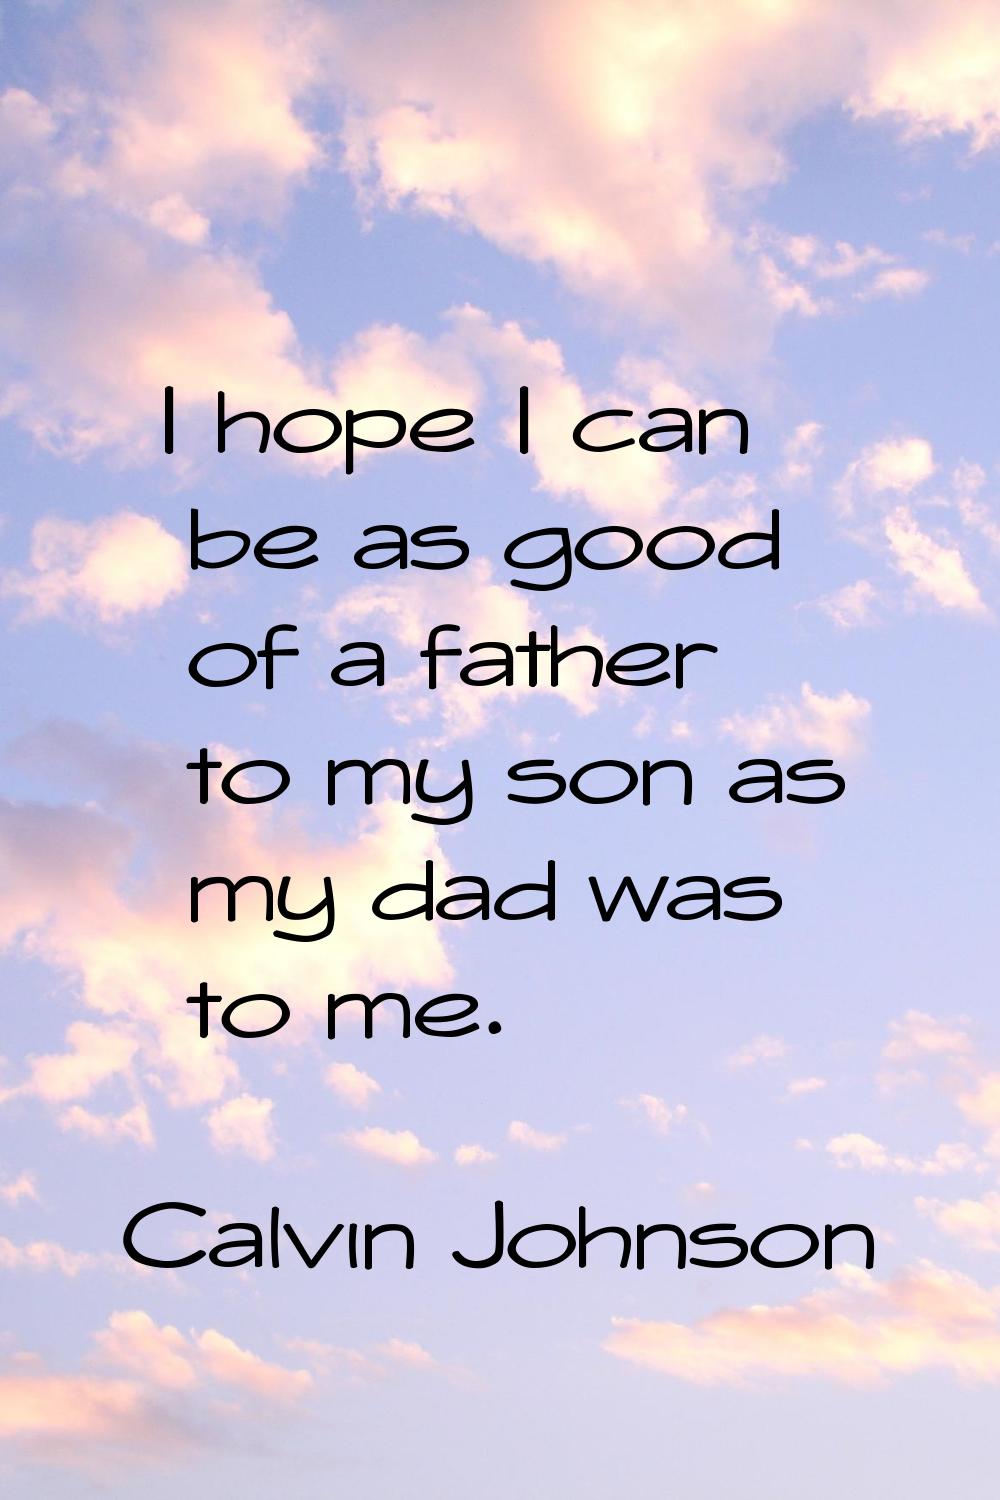 I hope I can be as good of a father to my son as my dad was to me.